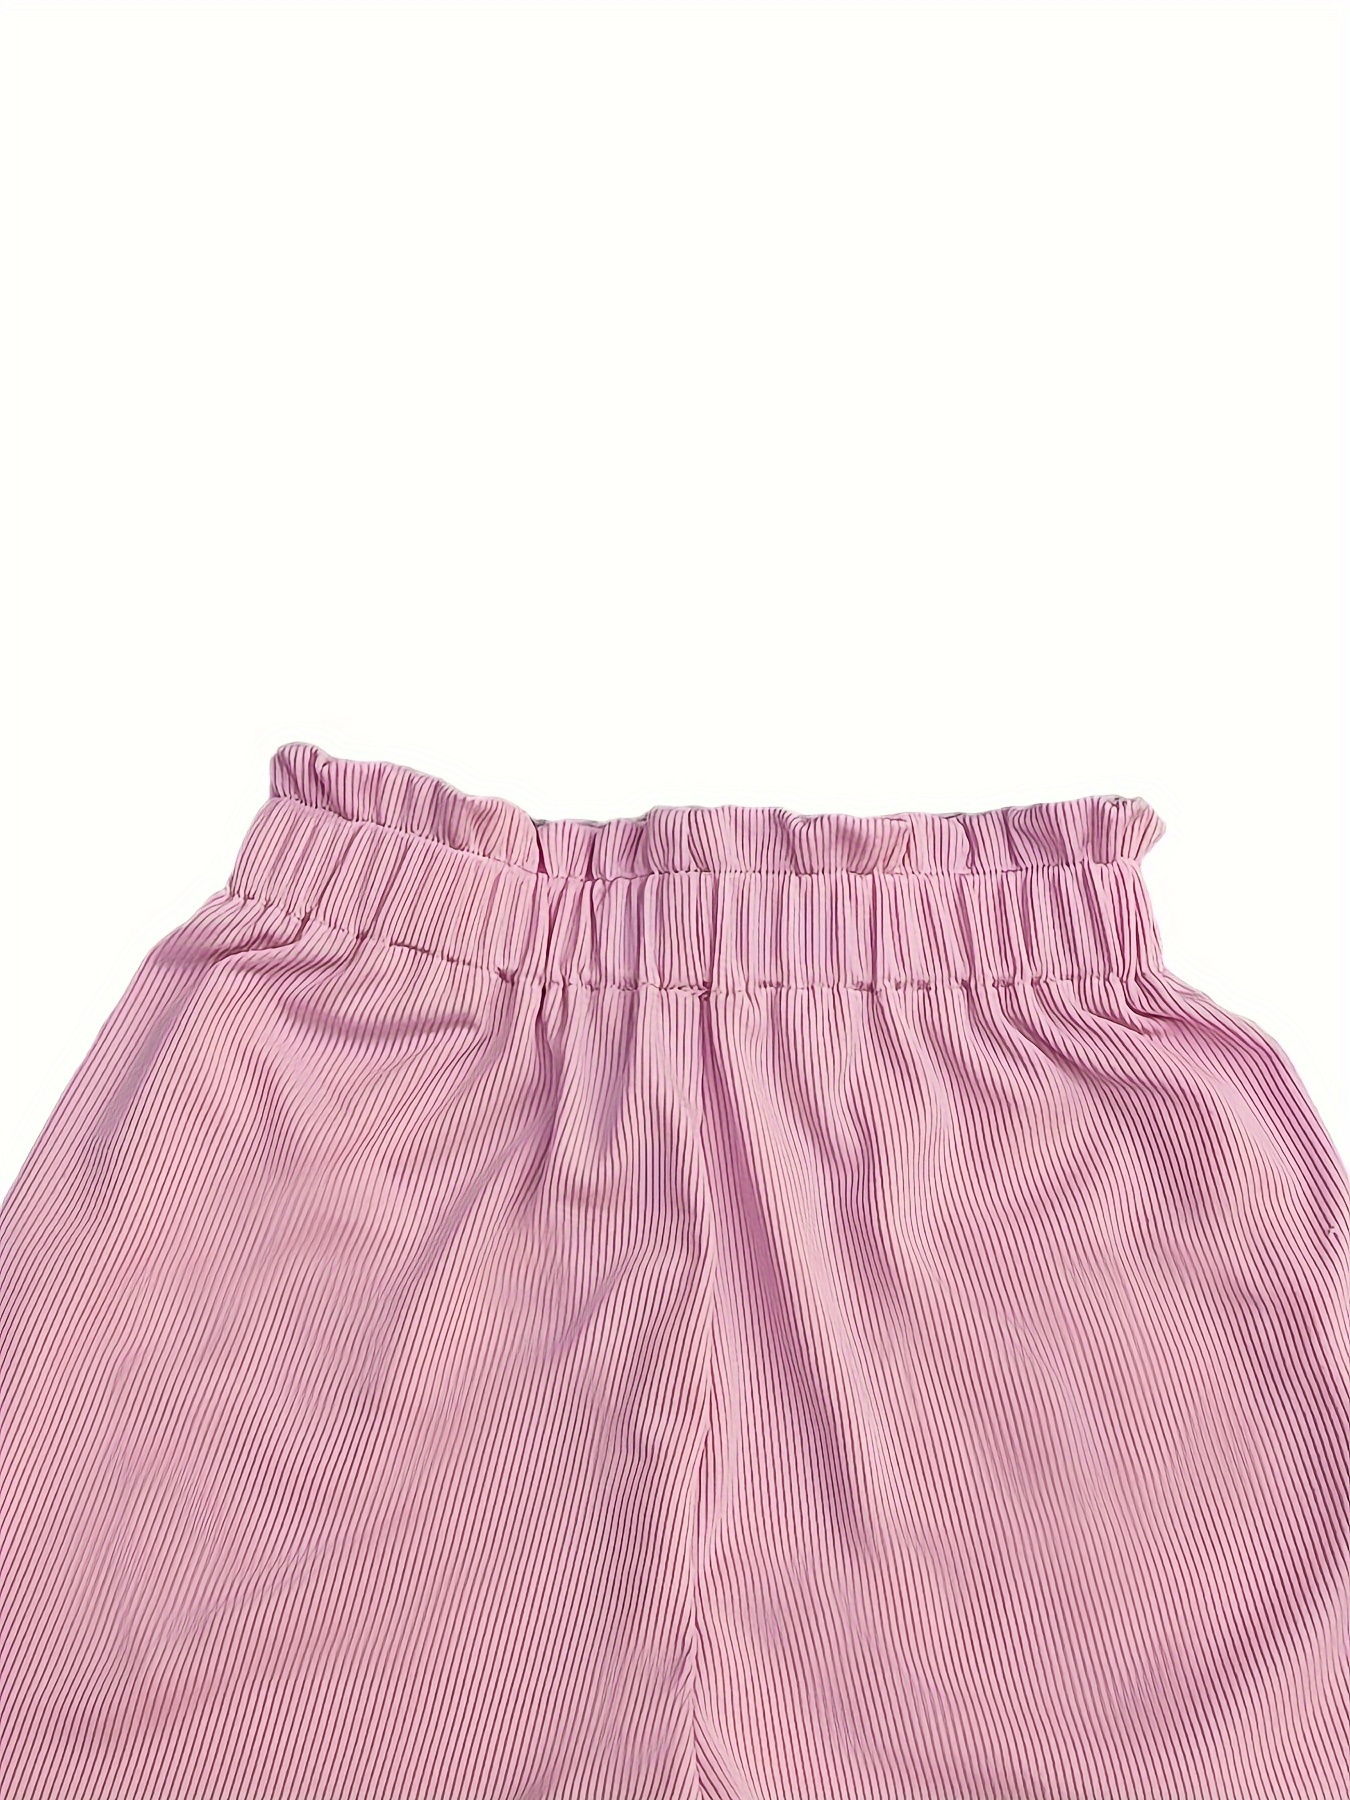 girls solid elastic waist shorts trendy shorts summer clothes gift party